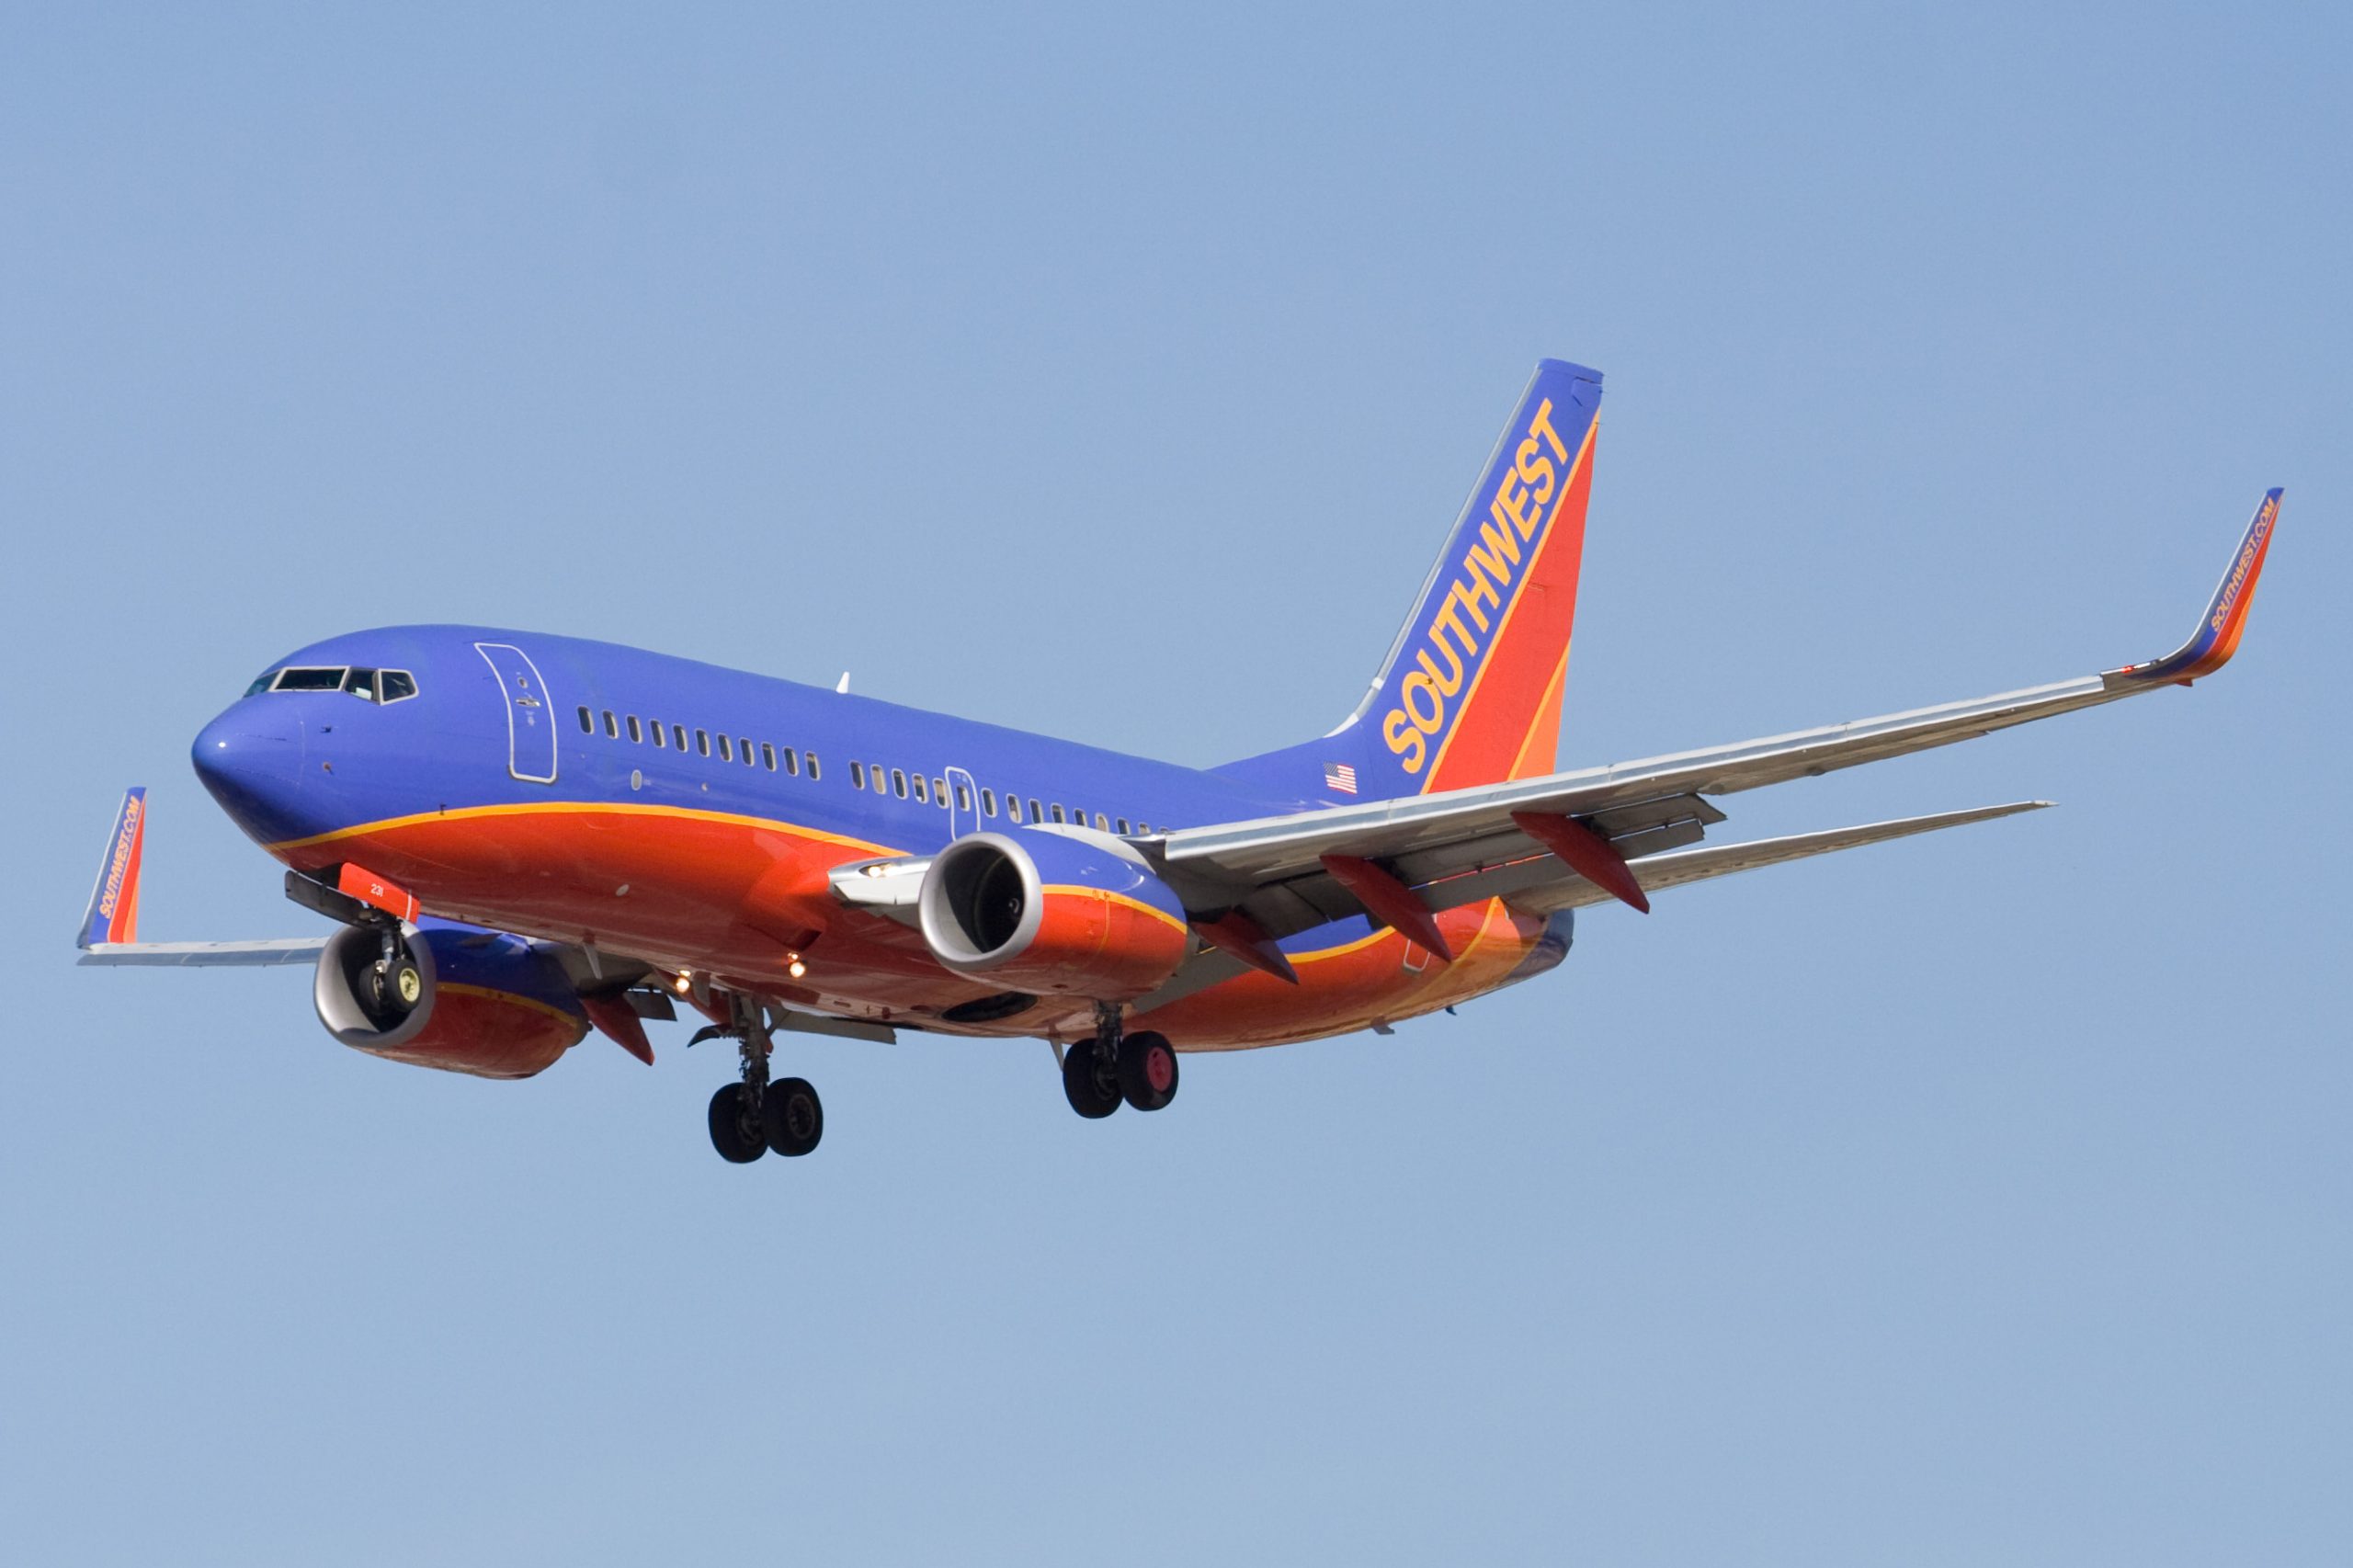 A Southwest Airlines airplane, blue and red coloured, flying against a clear blue sky.